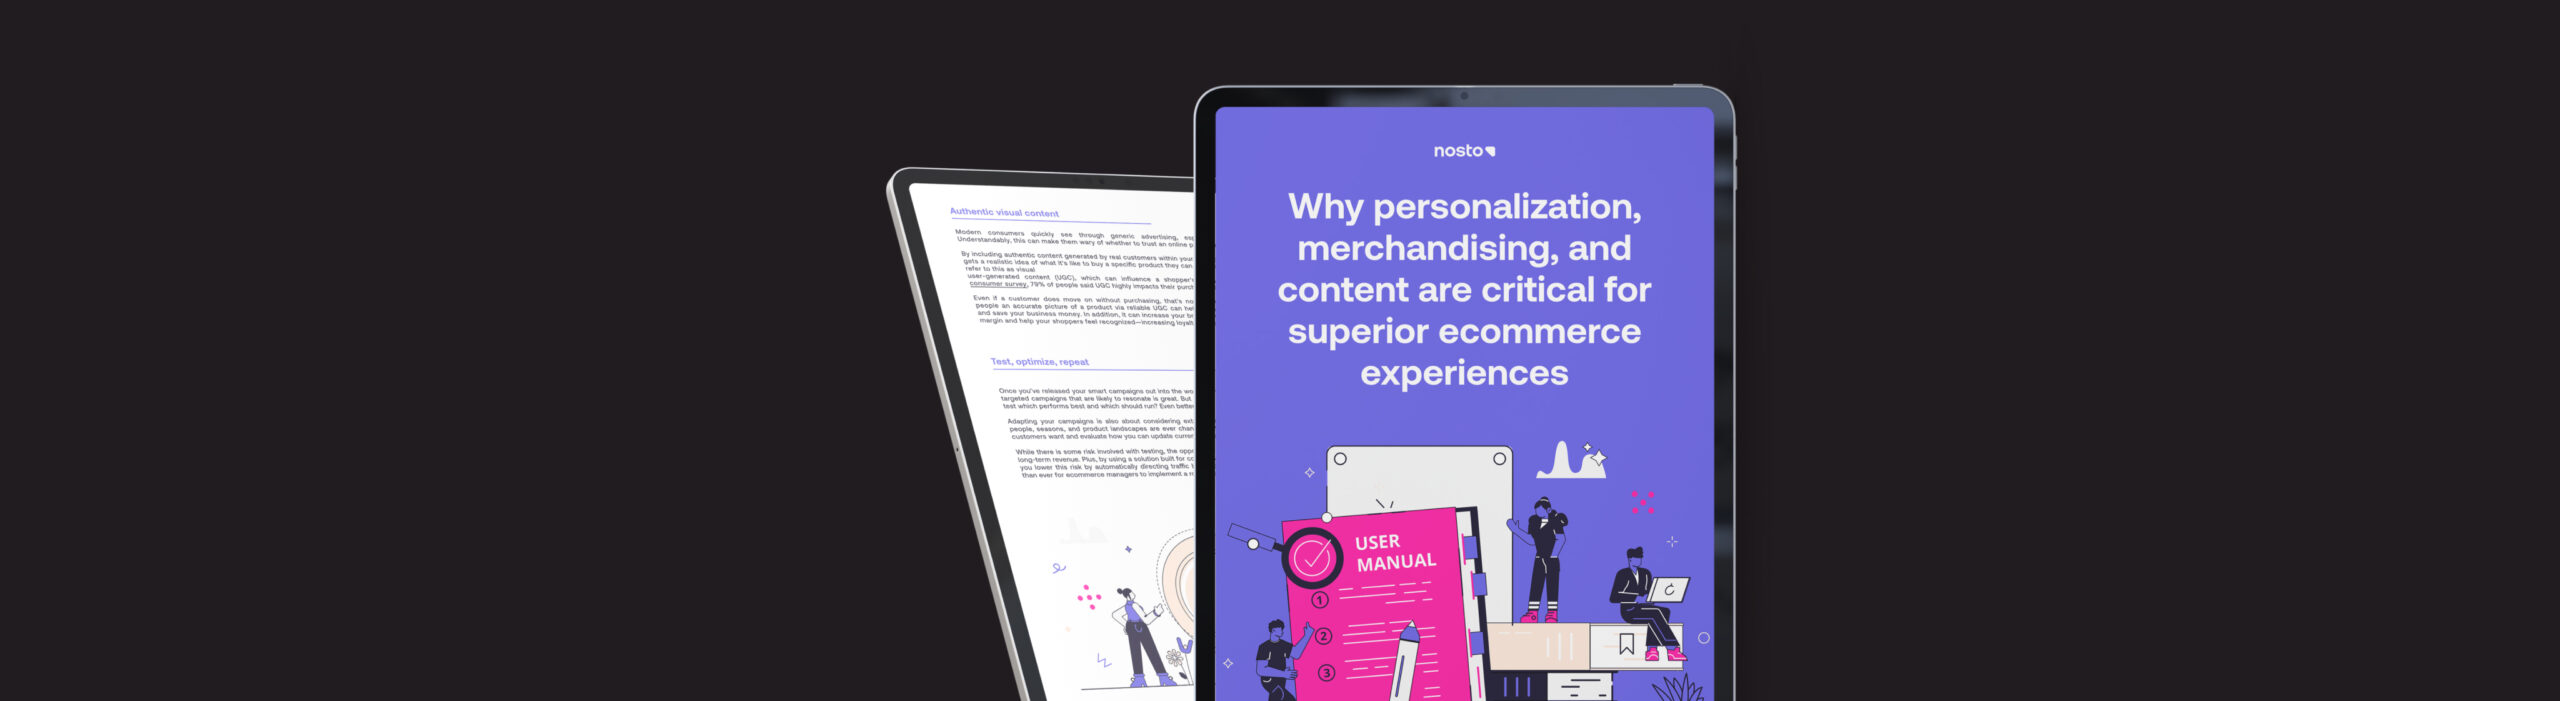 Why personalization, merchandising, and content are critical for superior ecommerce experiences